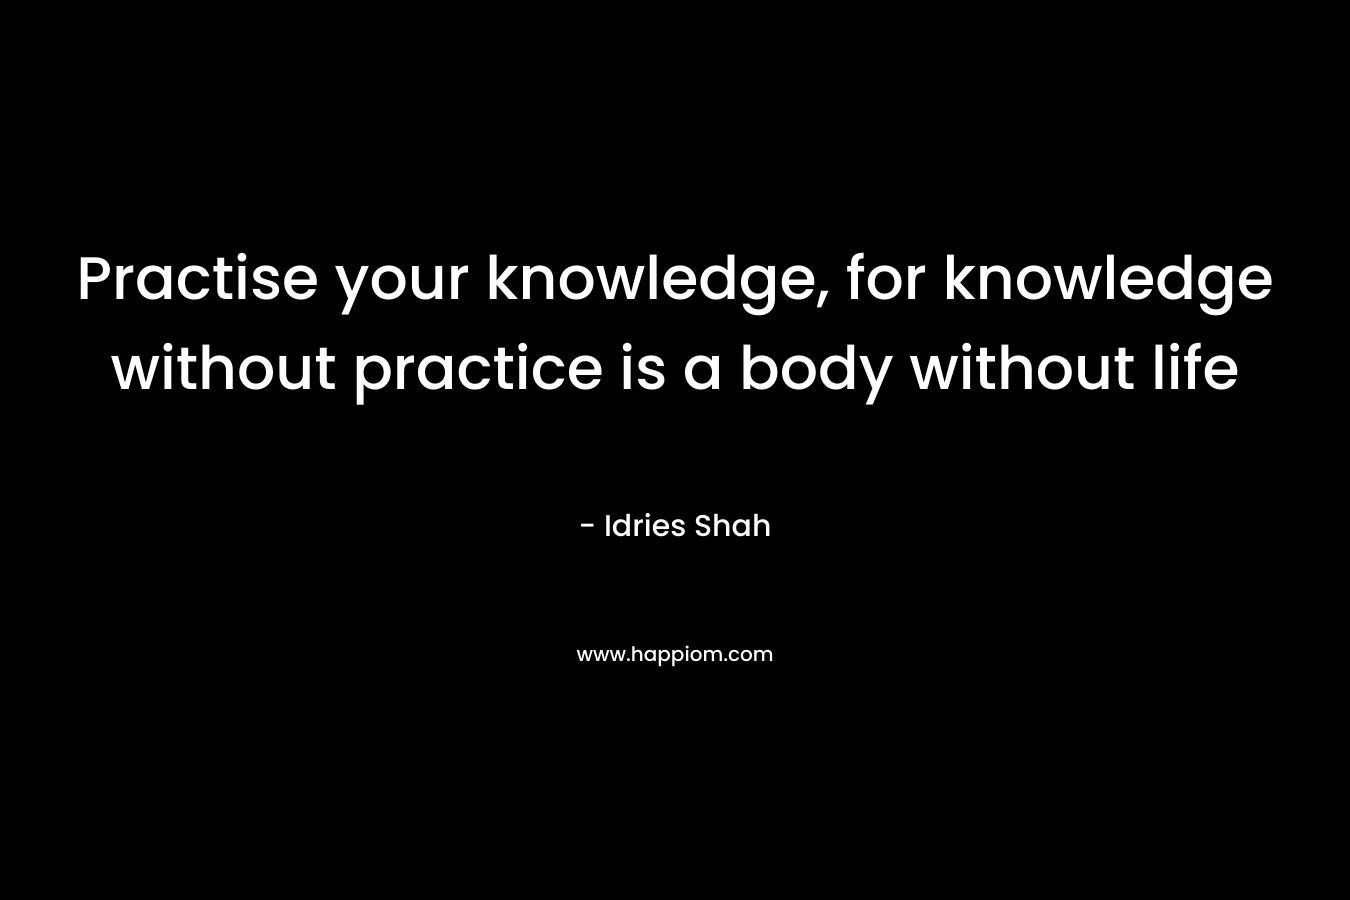 Practise your knowledge, for knowledge without practice is a body without life